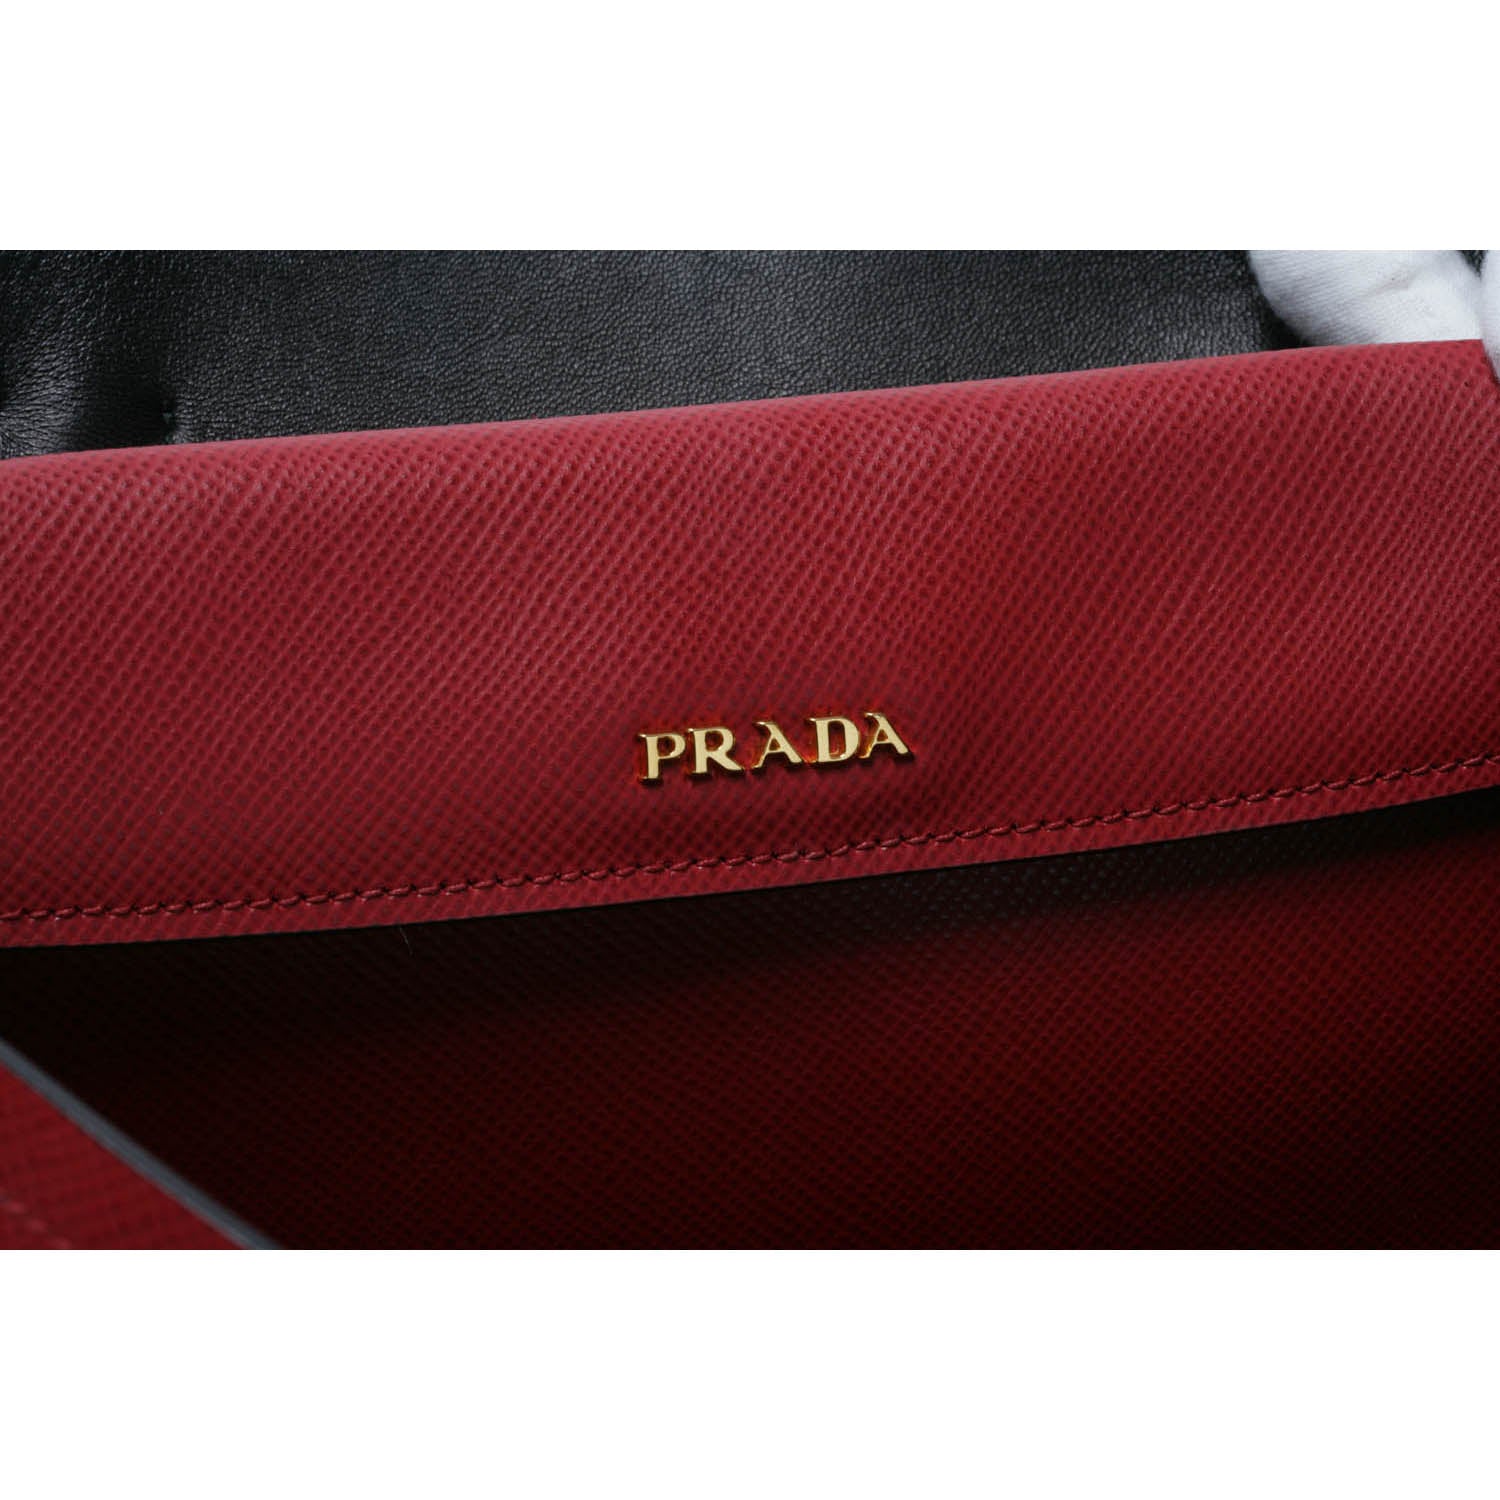 Prada Cuir Double Tote Saffiano Leather Large - ShopStyle